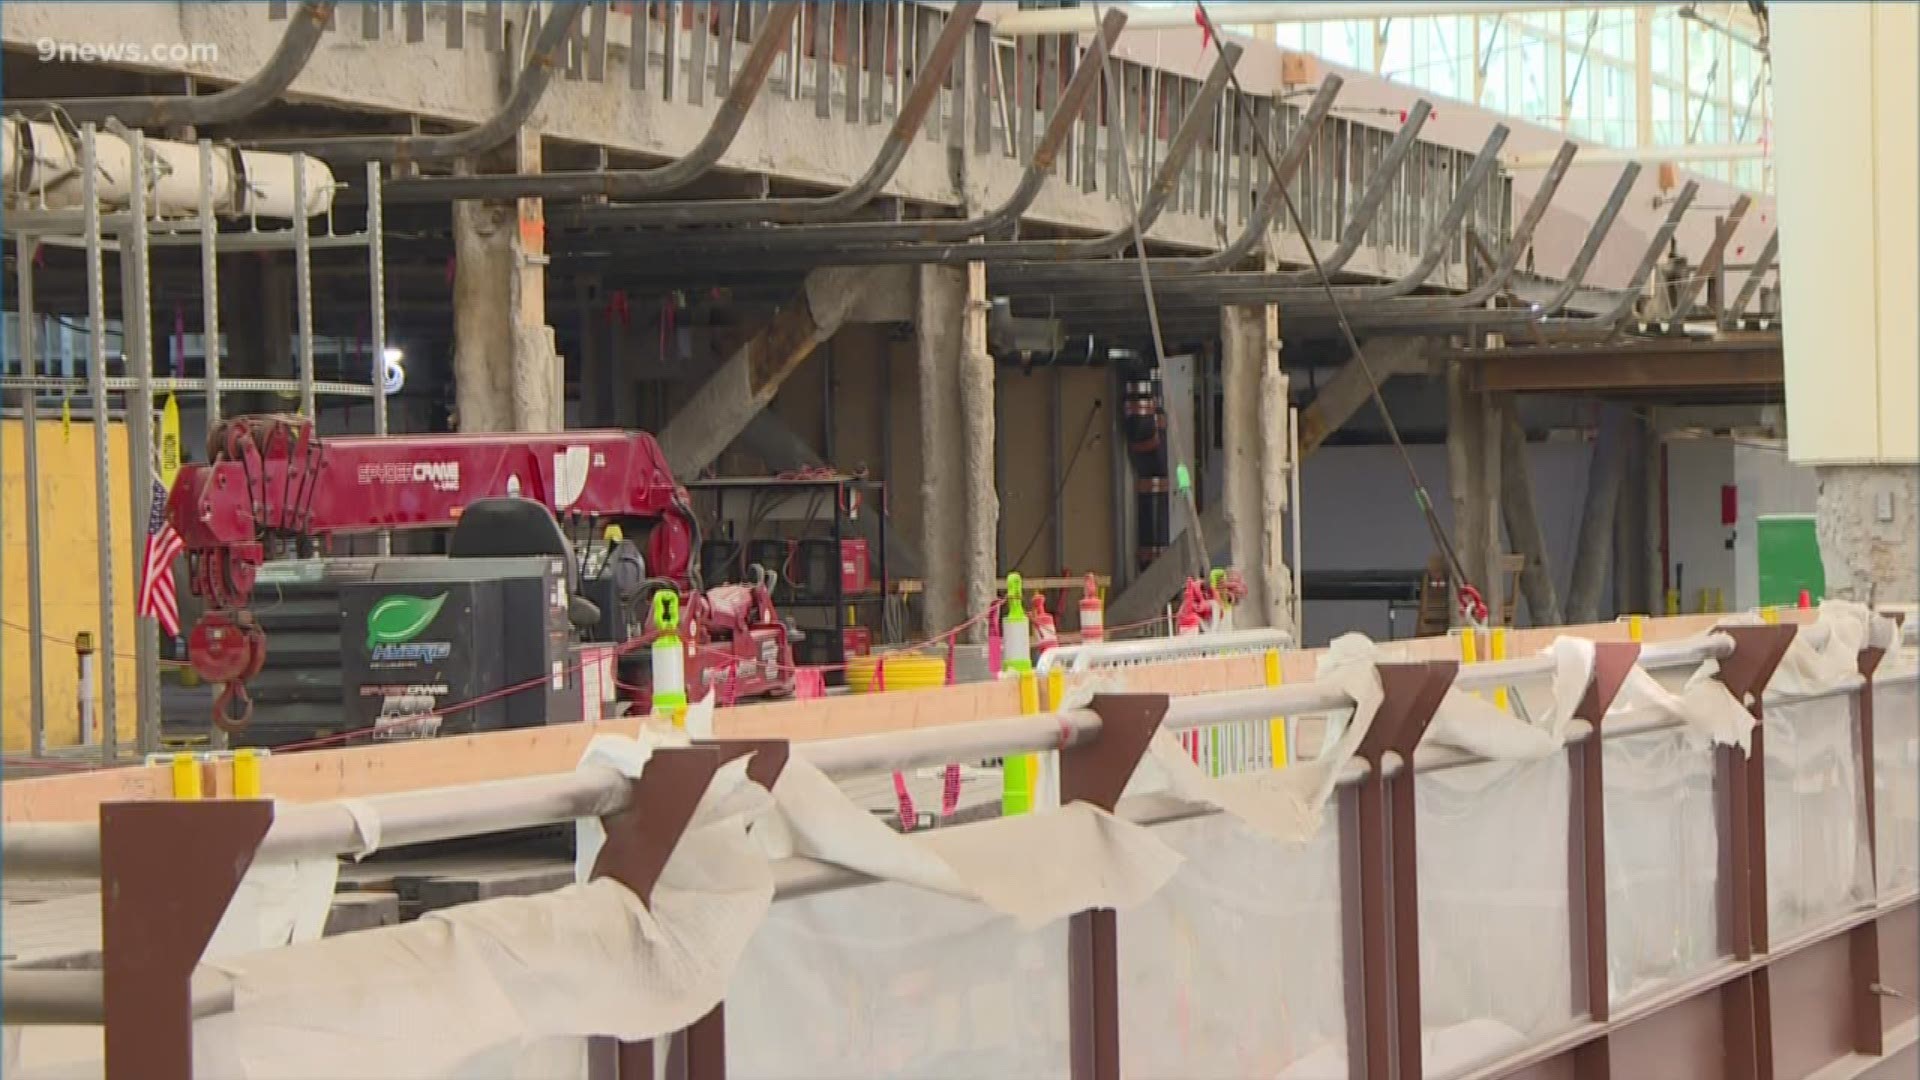 Denver's airport and the contractor handling construction there went back-and-forth Monday, exchanging allegations about who's to blame for delays.